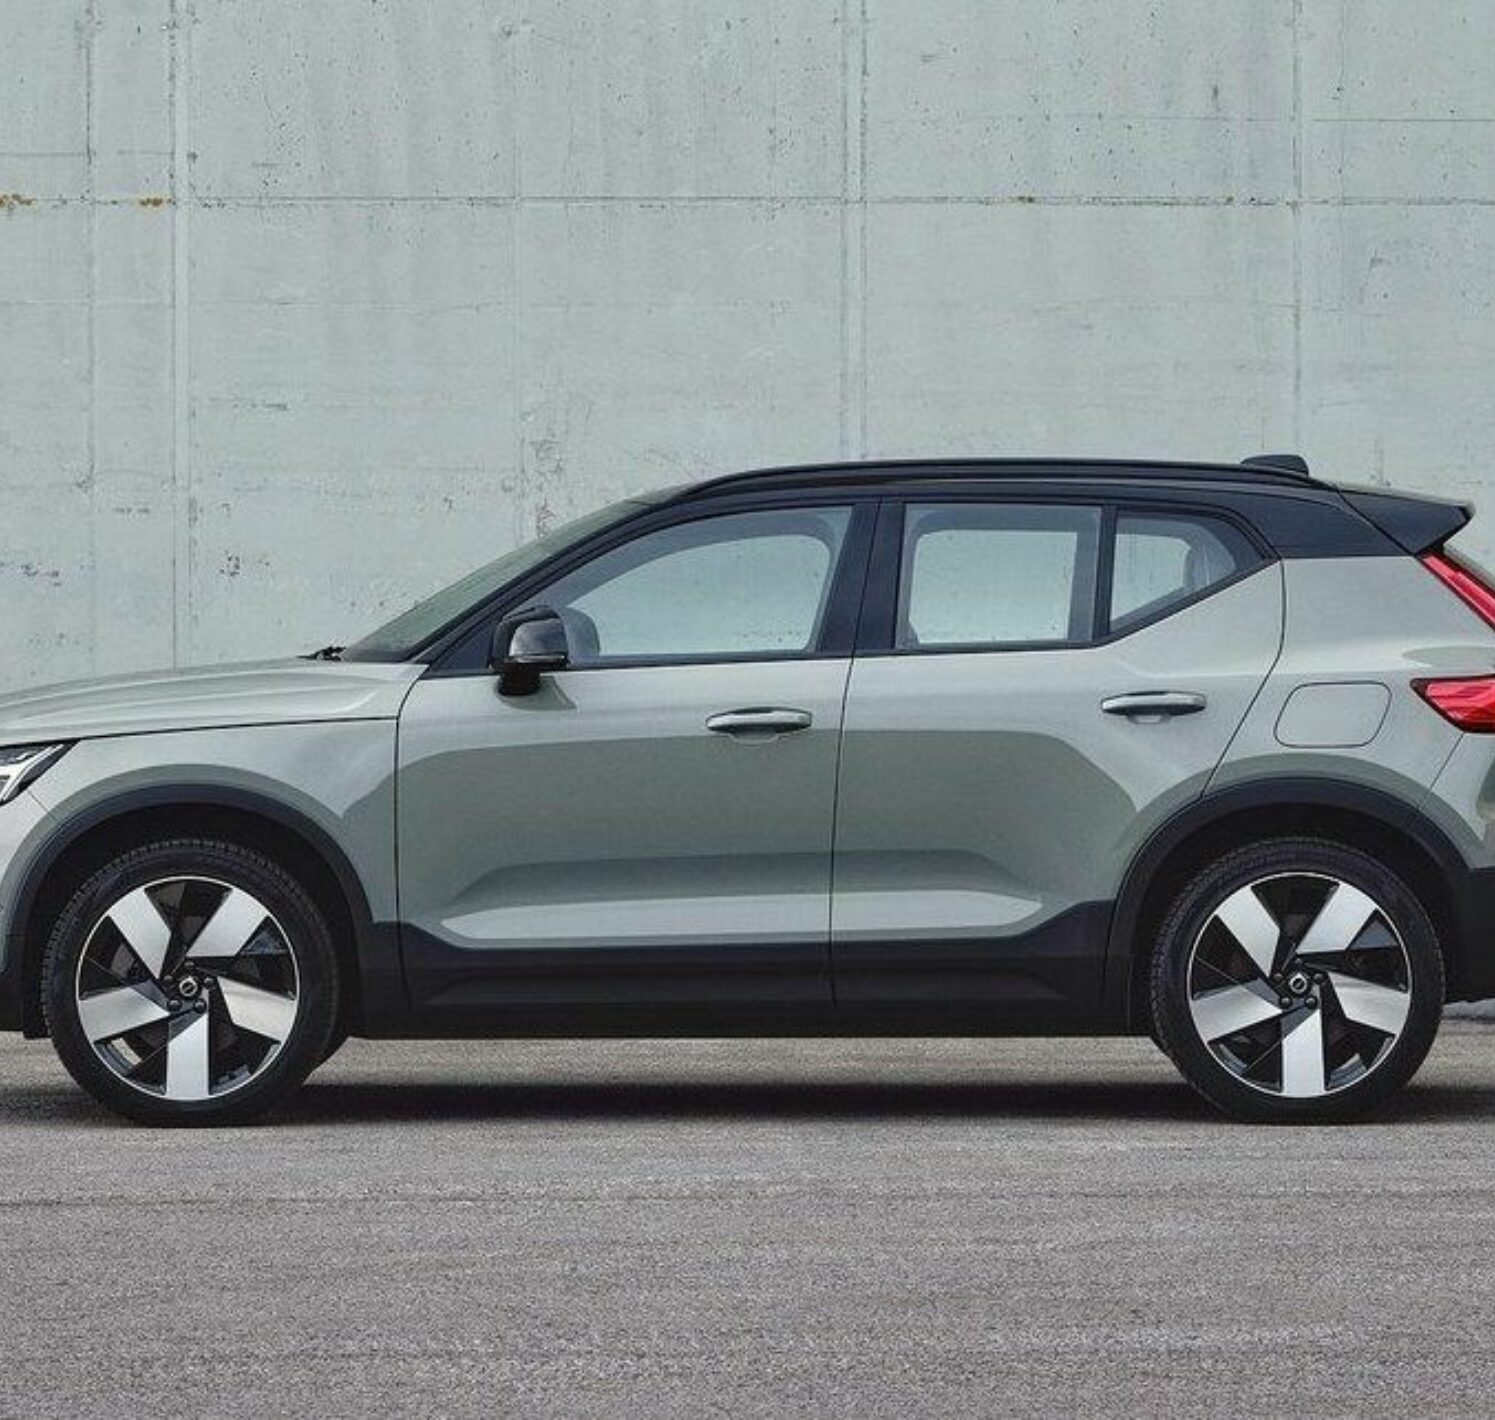 https://autofilter.sk/assets/images/xc40-recharge/gallery/volvo-xc40-recharge-2022_08-galeria.jpg - obrazok